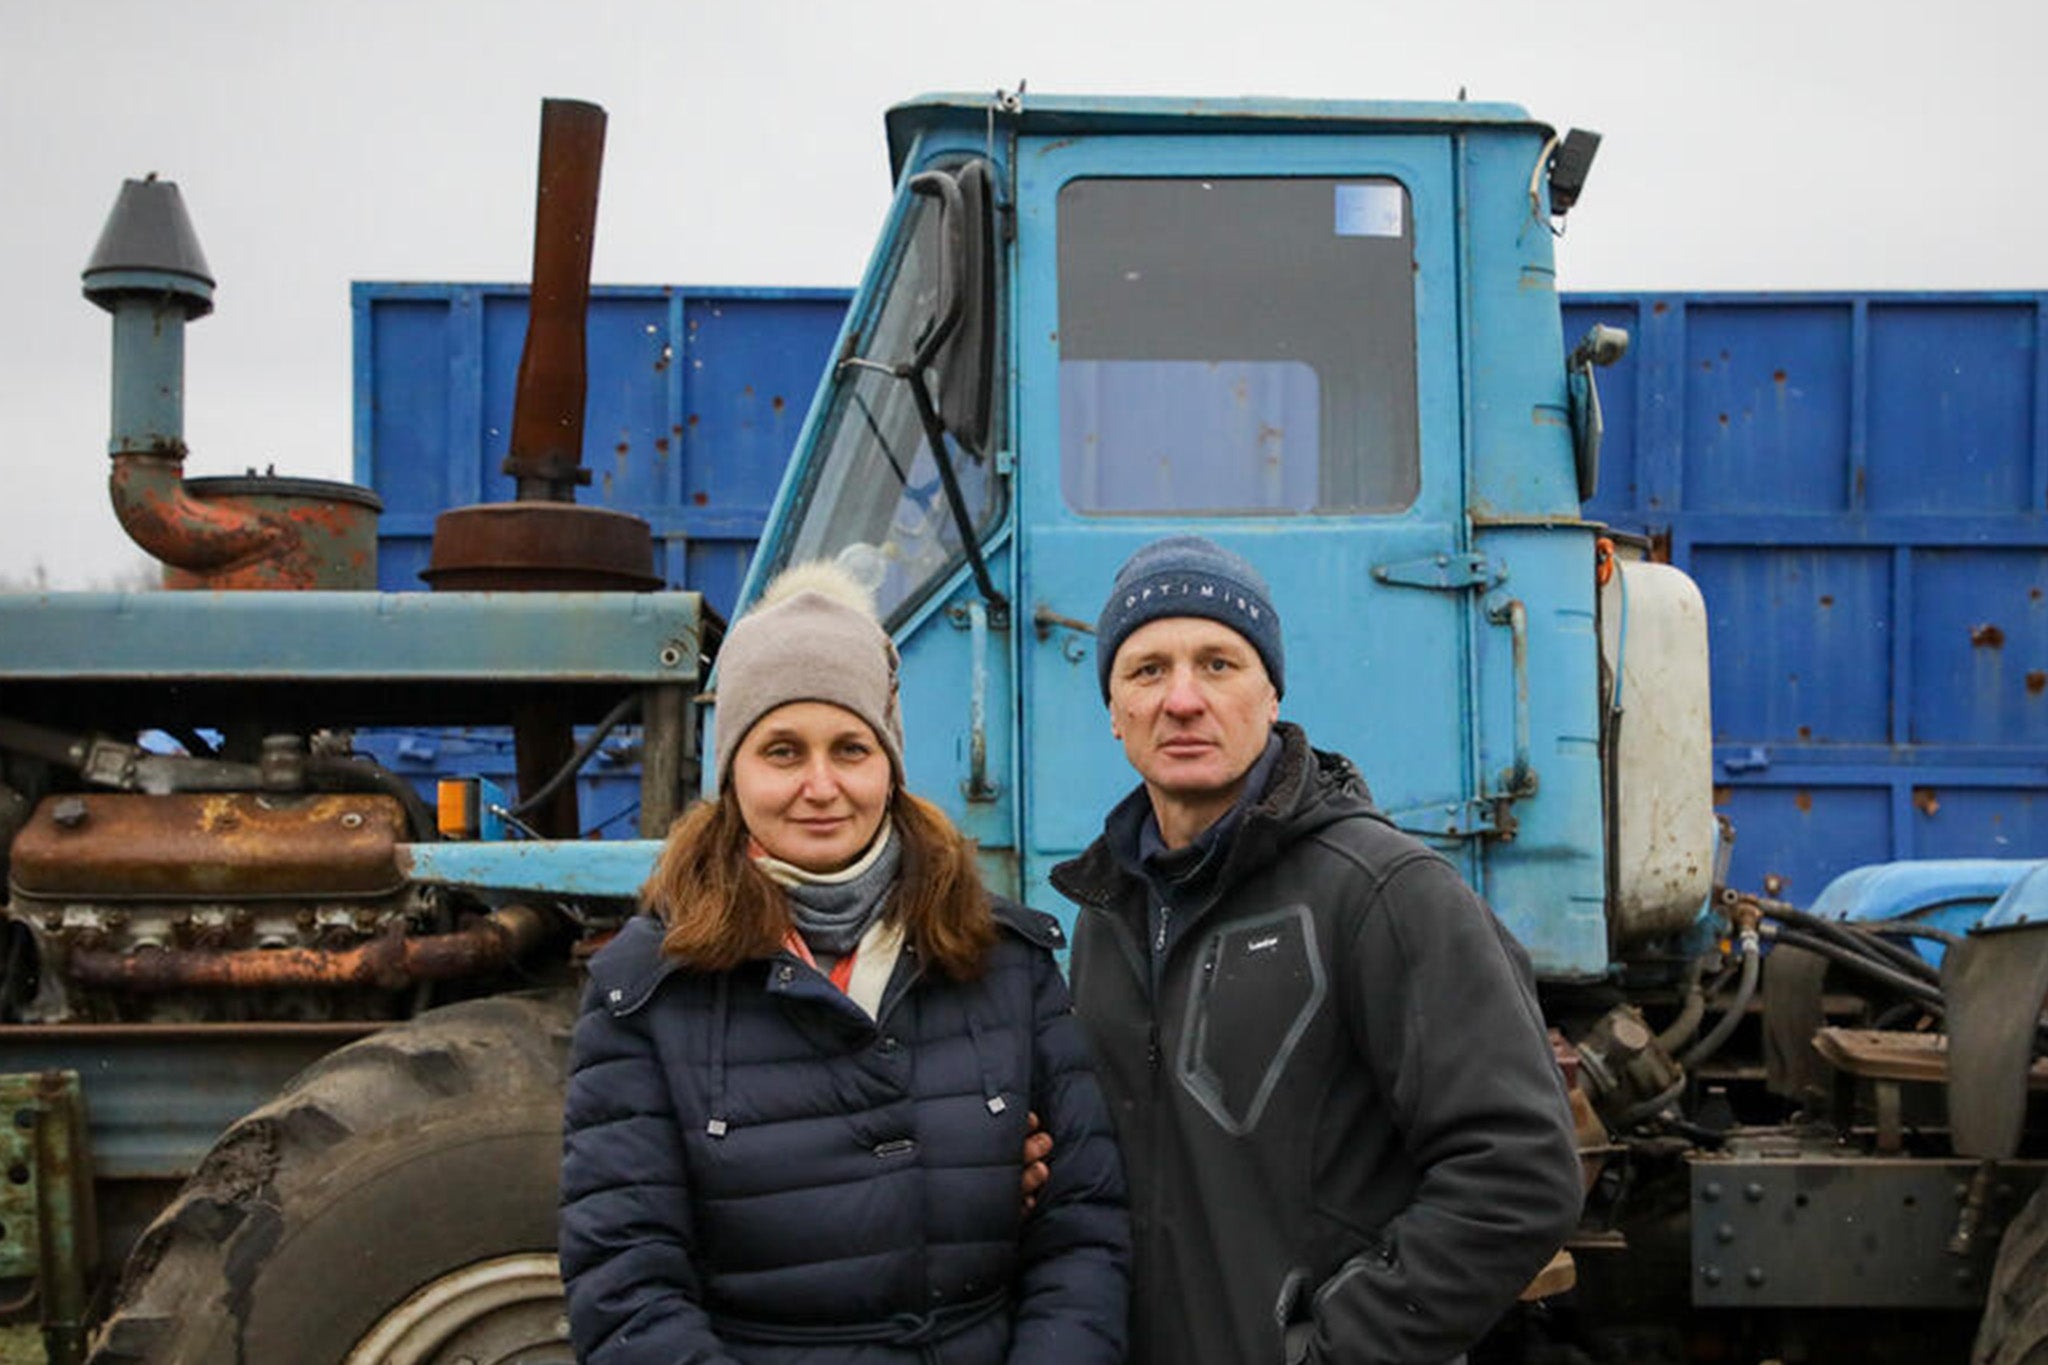 Volodymyr and Liudmyla’s farm near Kharkiv is being demined by charity workers